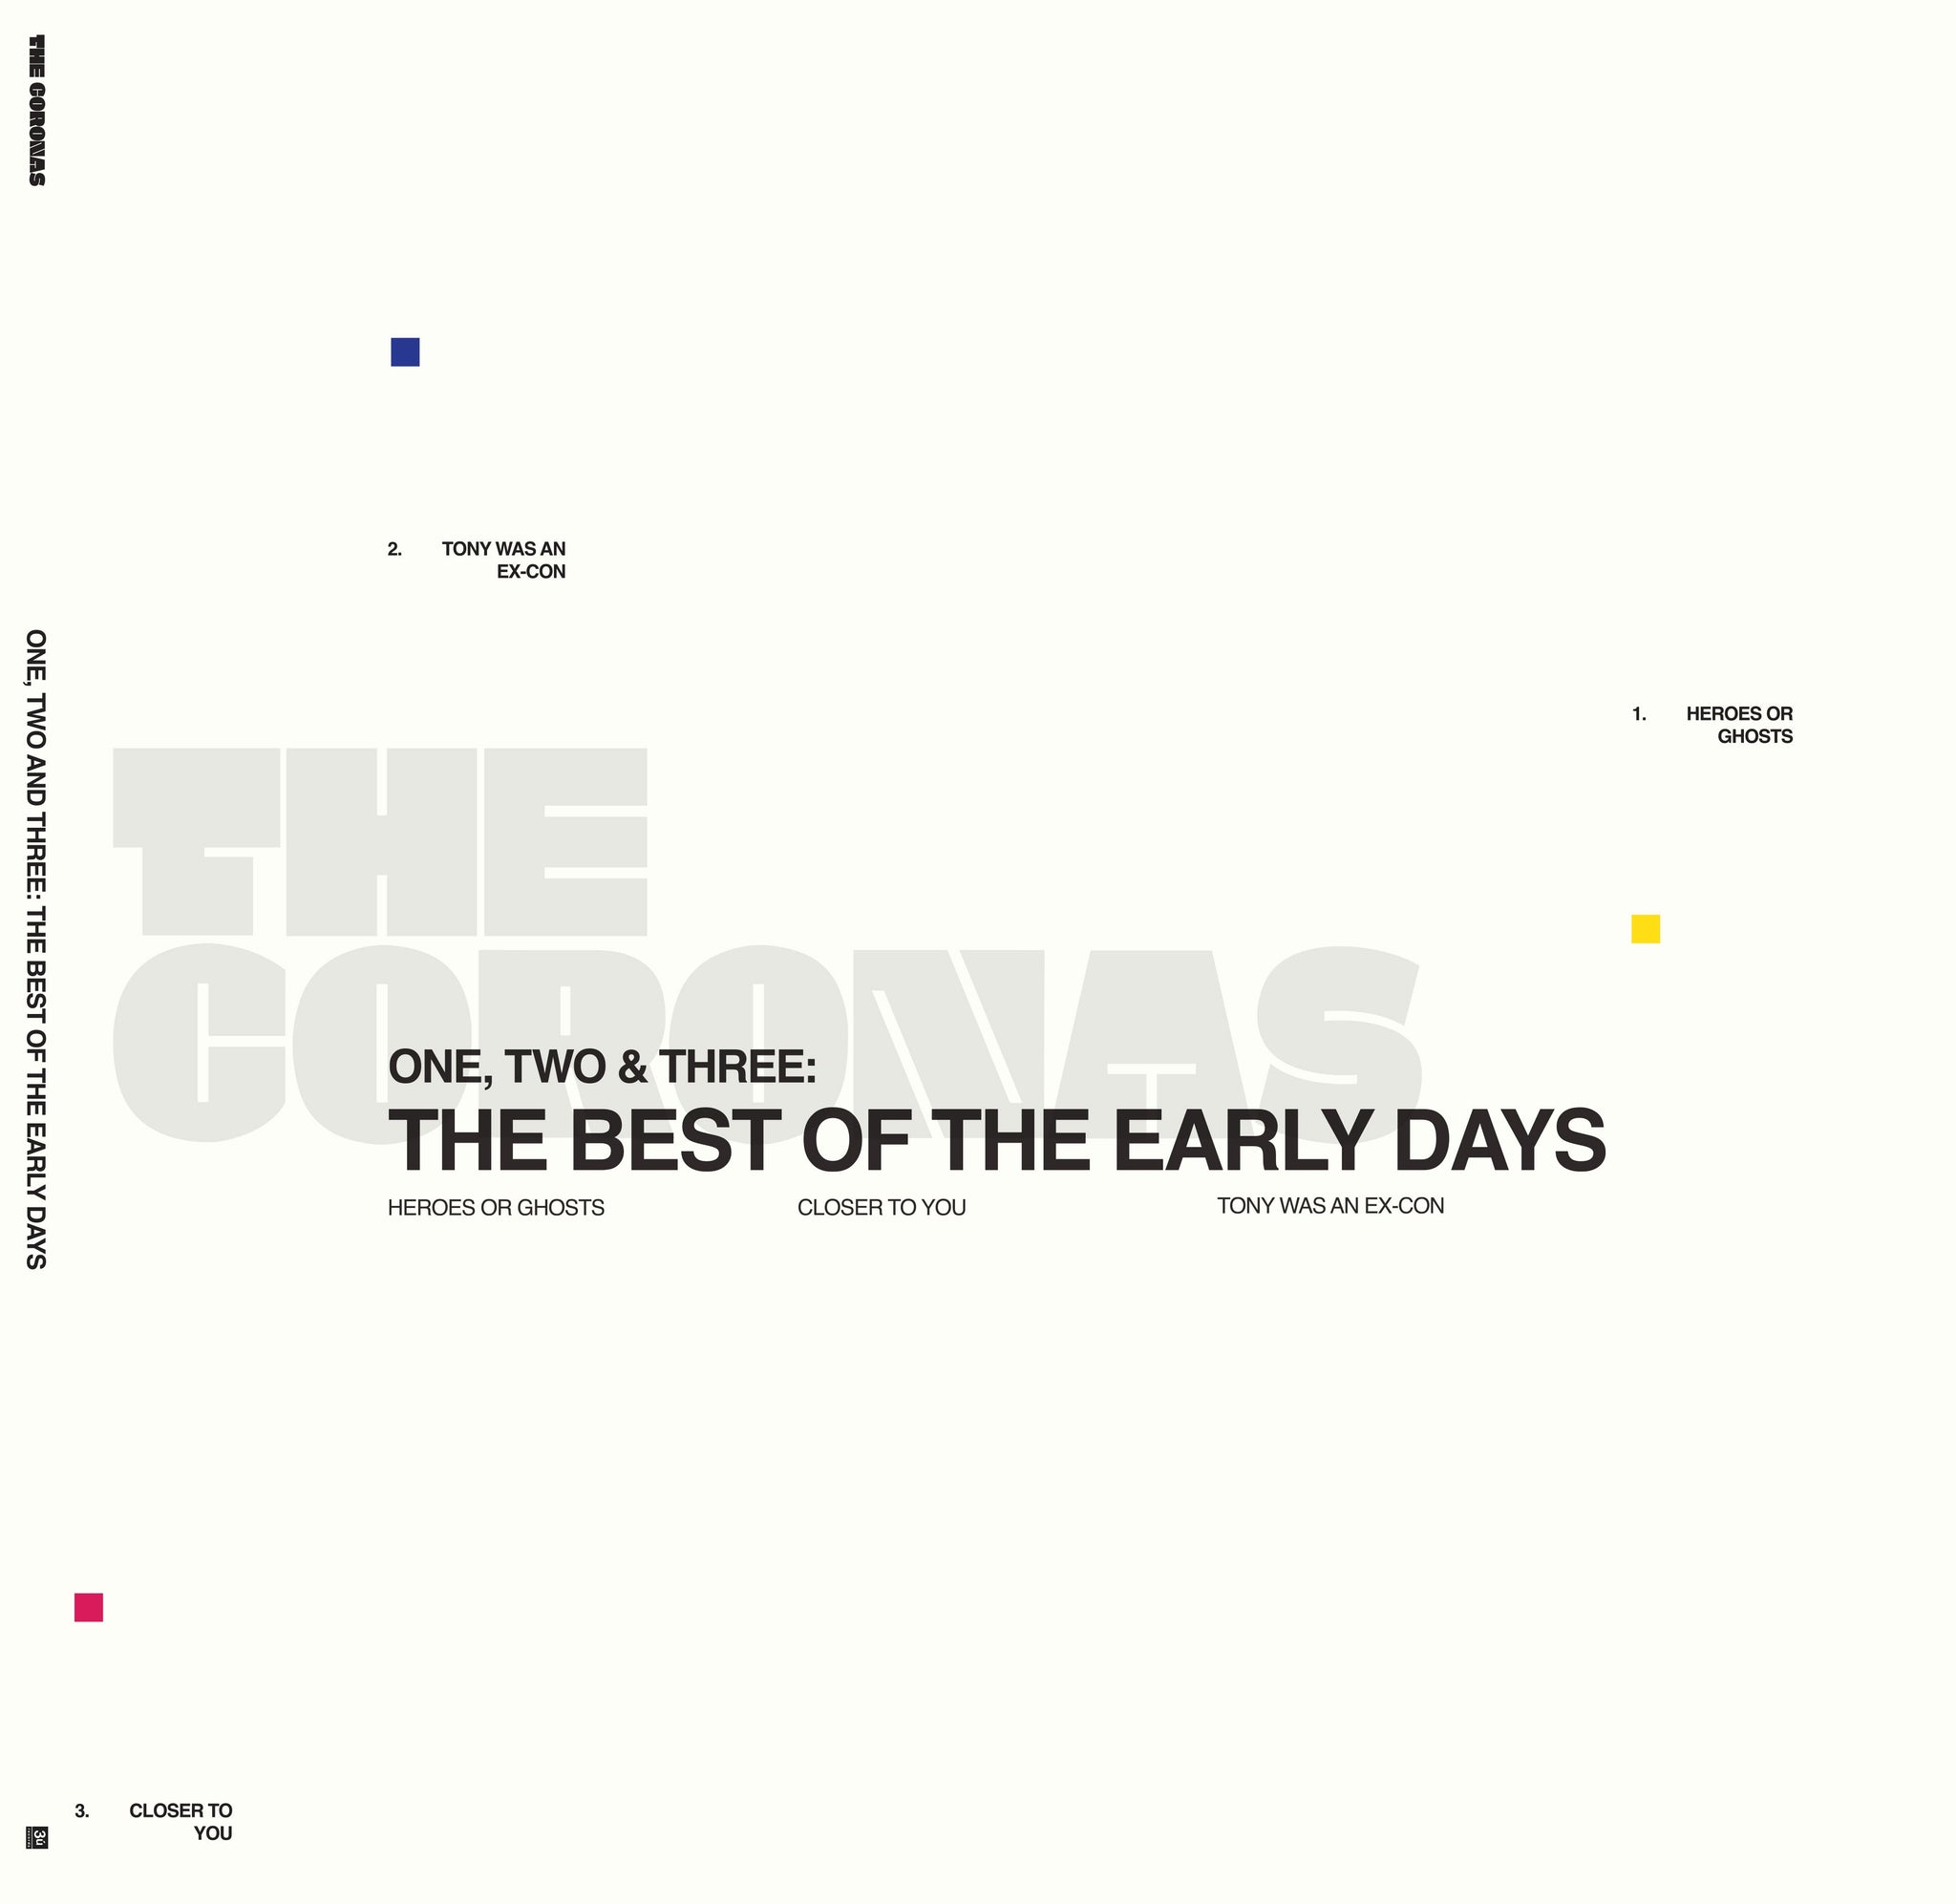 One, Two & Three: The Best Of The Early Days [Vinyl]